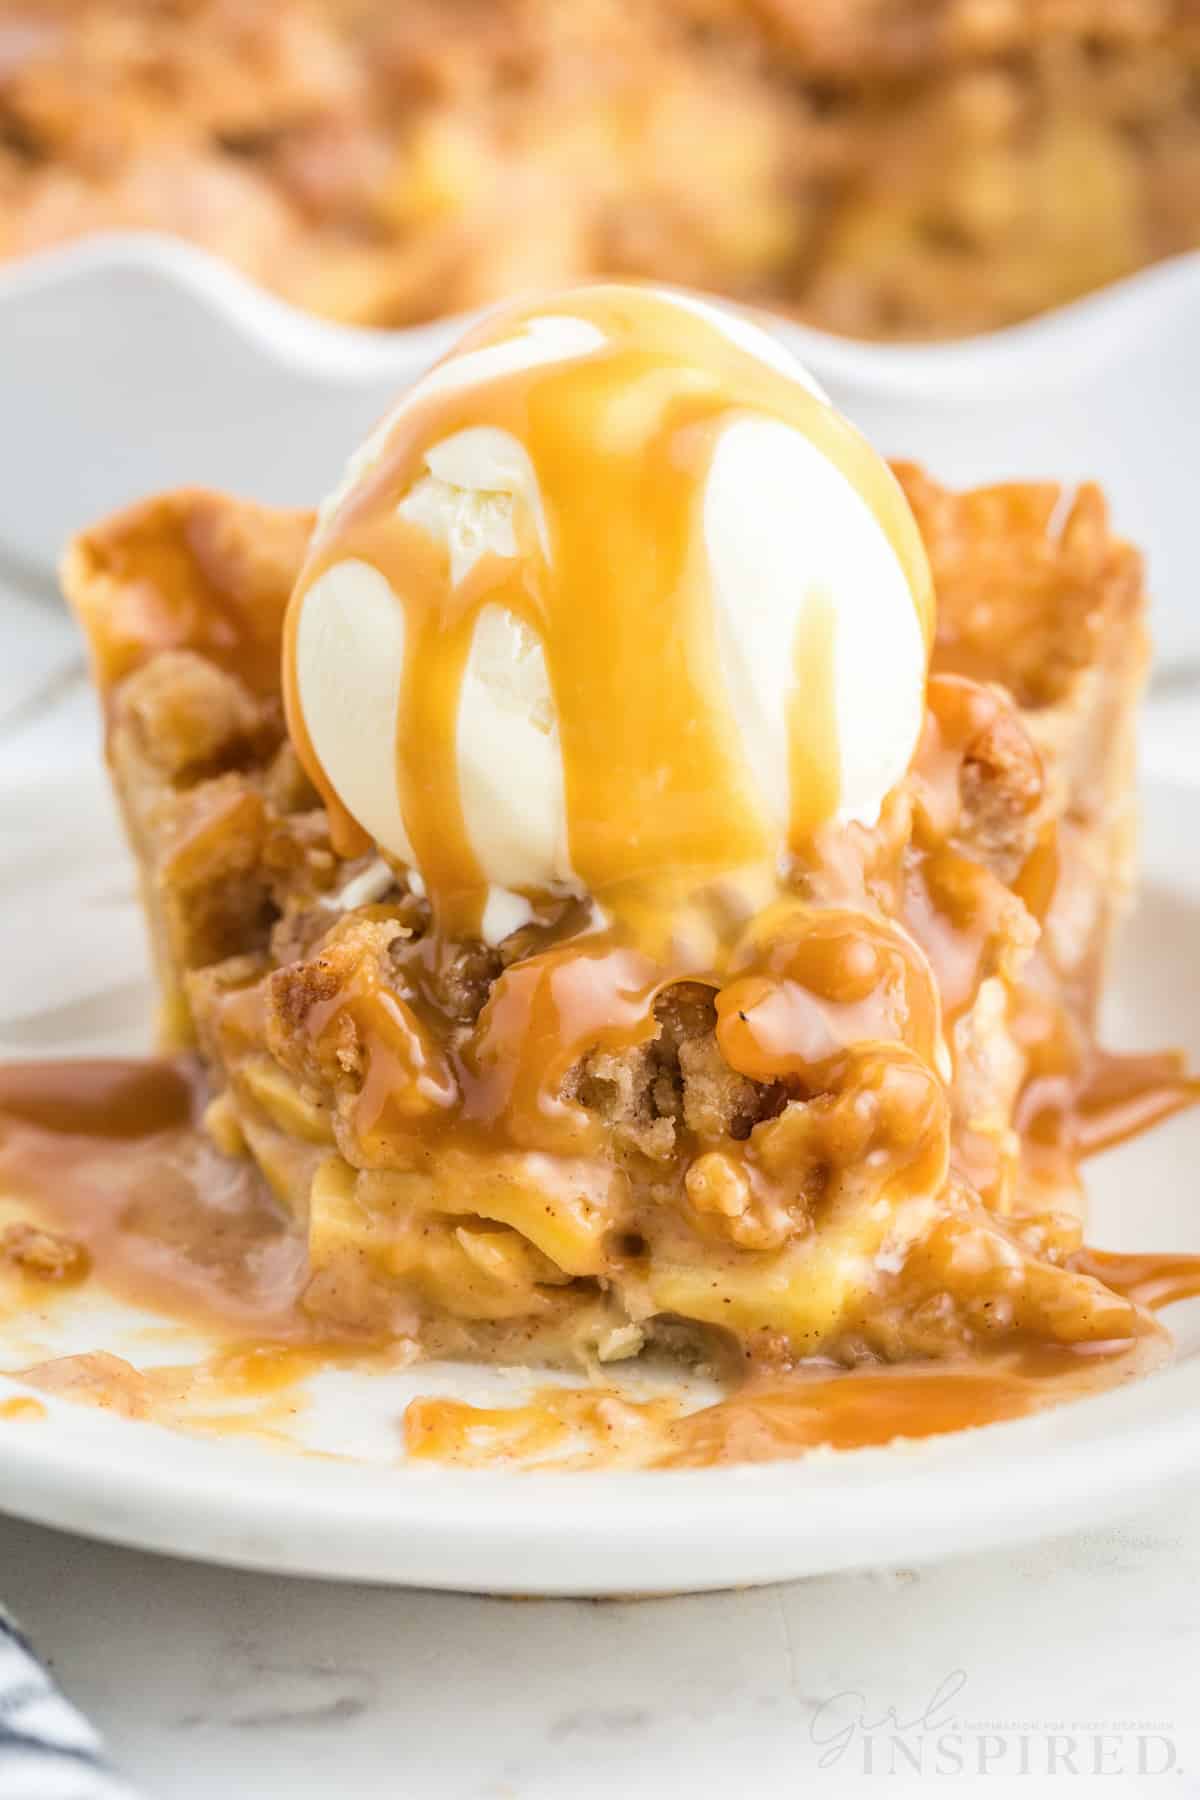 Slice of Dutch caramel apple pie on a white serving plate, scoop of vanilla ice cream on top of the apple pie slice, caramel apple pie in the background, checkered linen, on a white marble countertop.